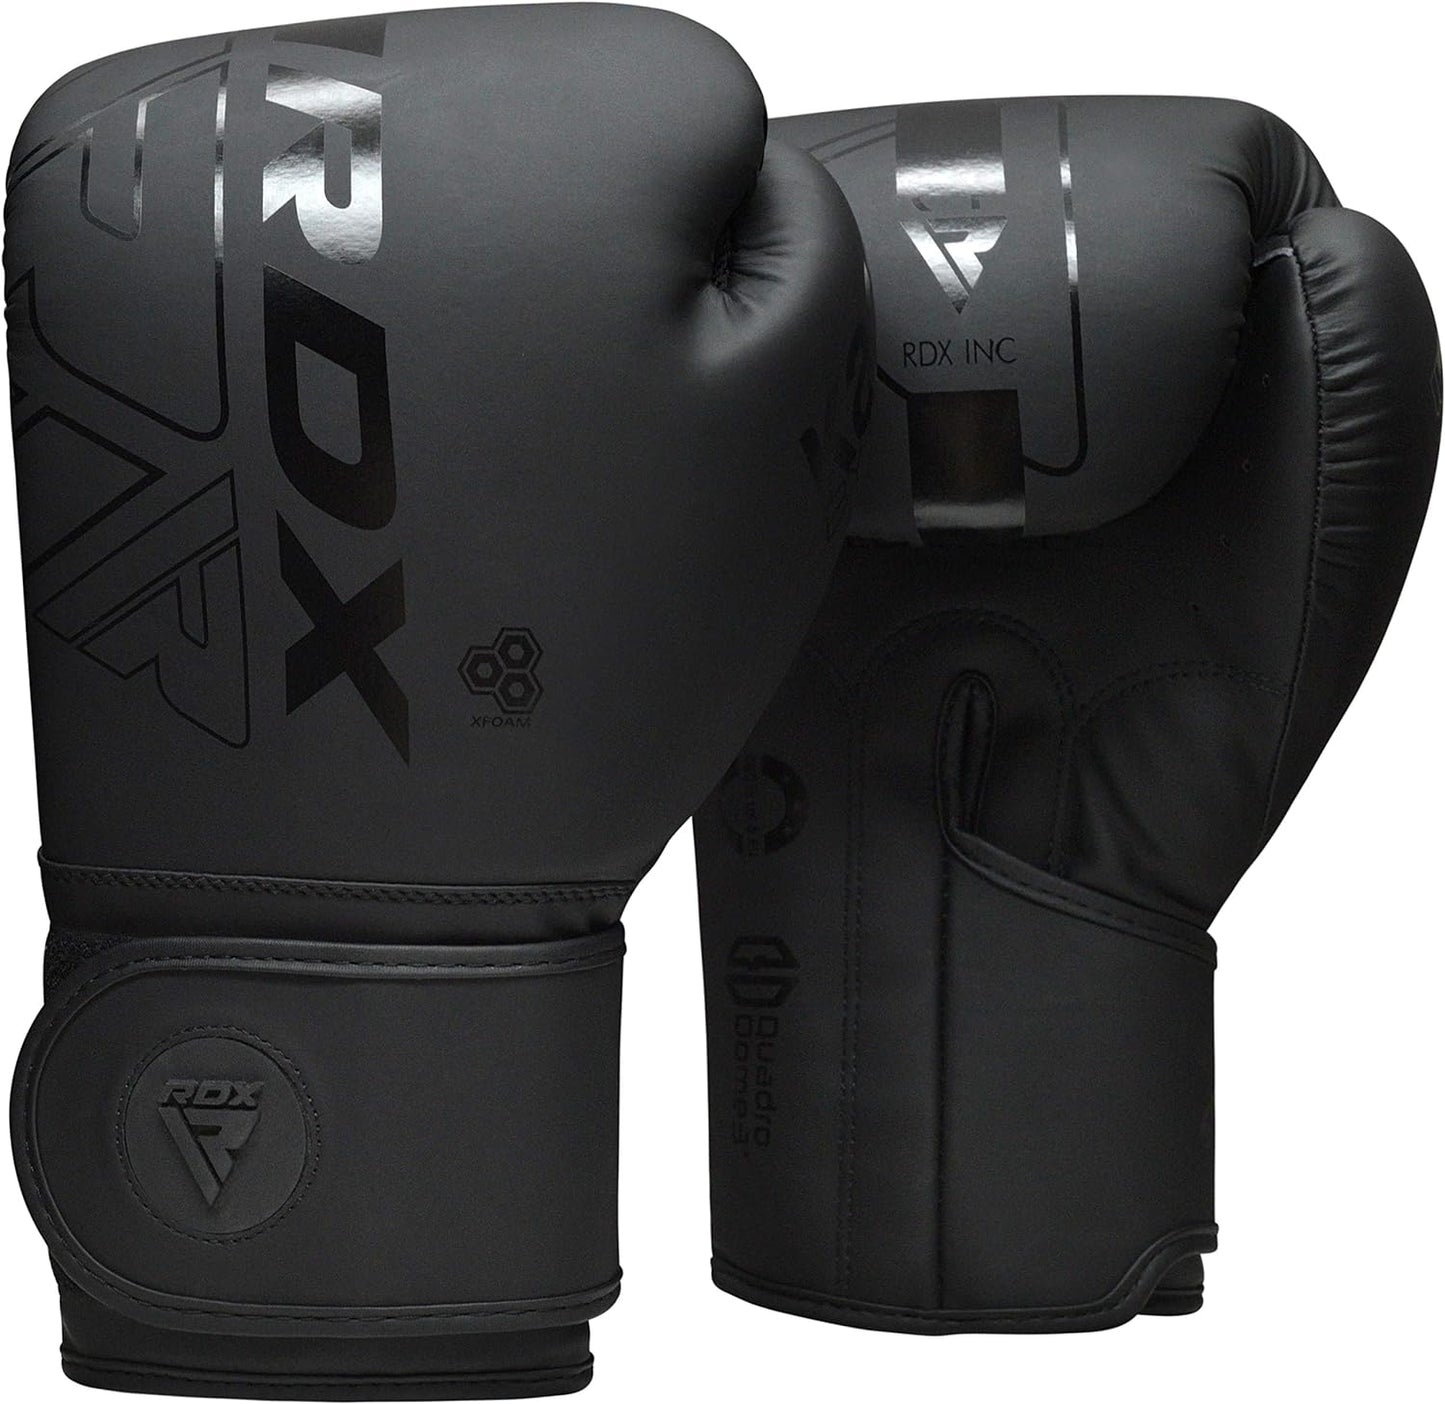 Eclipse Martial Art Supplies Training Gloves BLACK / 12 OZ RDX Boxing Gloves Men Women, Pro Training Sparring, Maya Hide Leather Muay Thai MMA Kickboxing, Adult Heavy Punching Bag Gloves Mitts Focus Pad Workout, Ventilated Palm